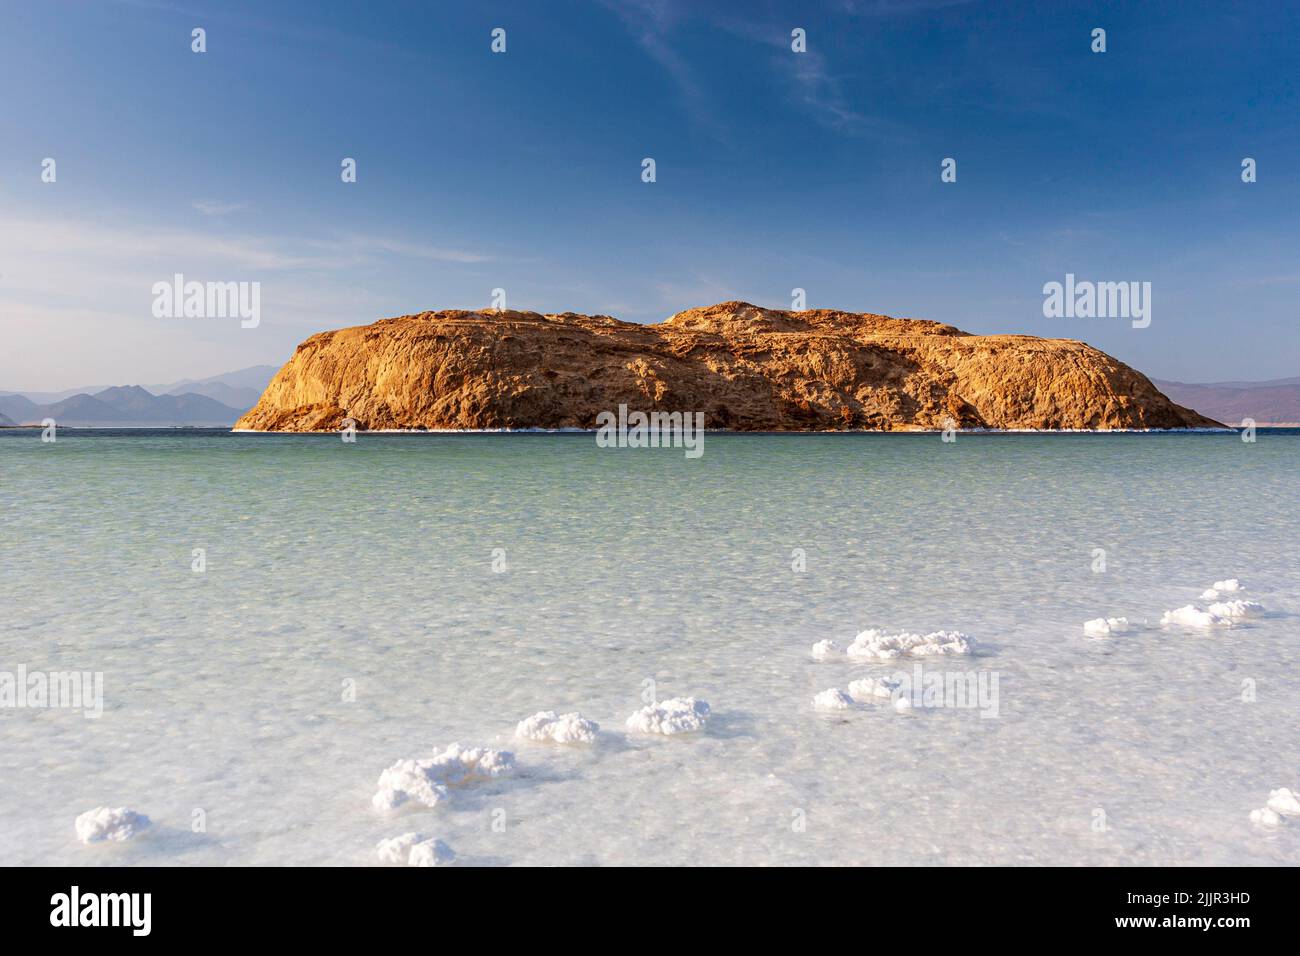 Island in Lake Assal surrounded by white salt crystals, Djibouti, East Africa. Horn of Africa Stock Photo